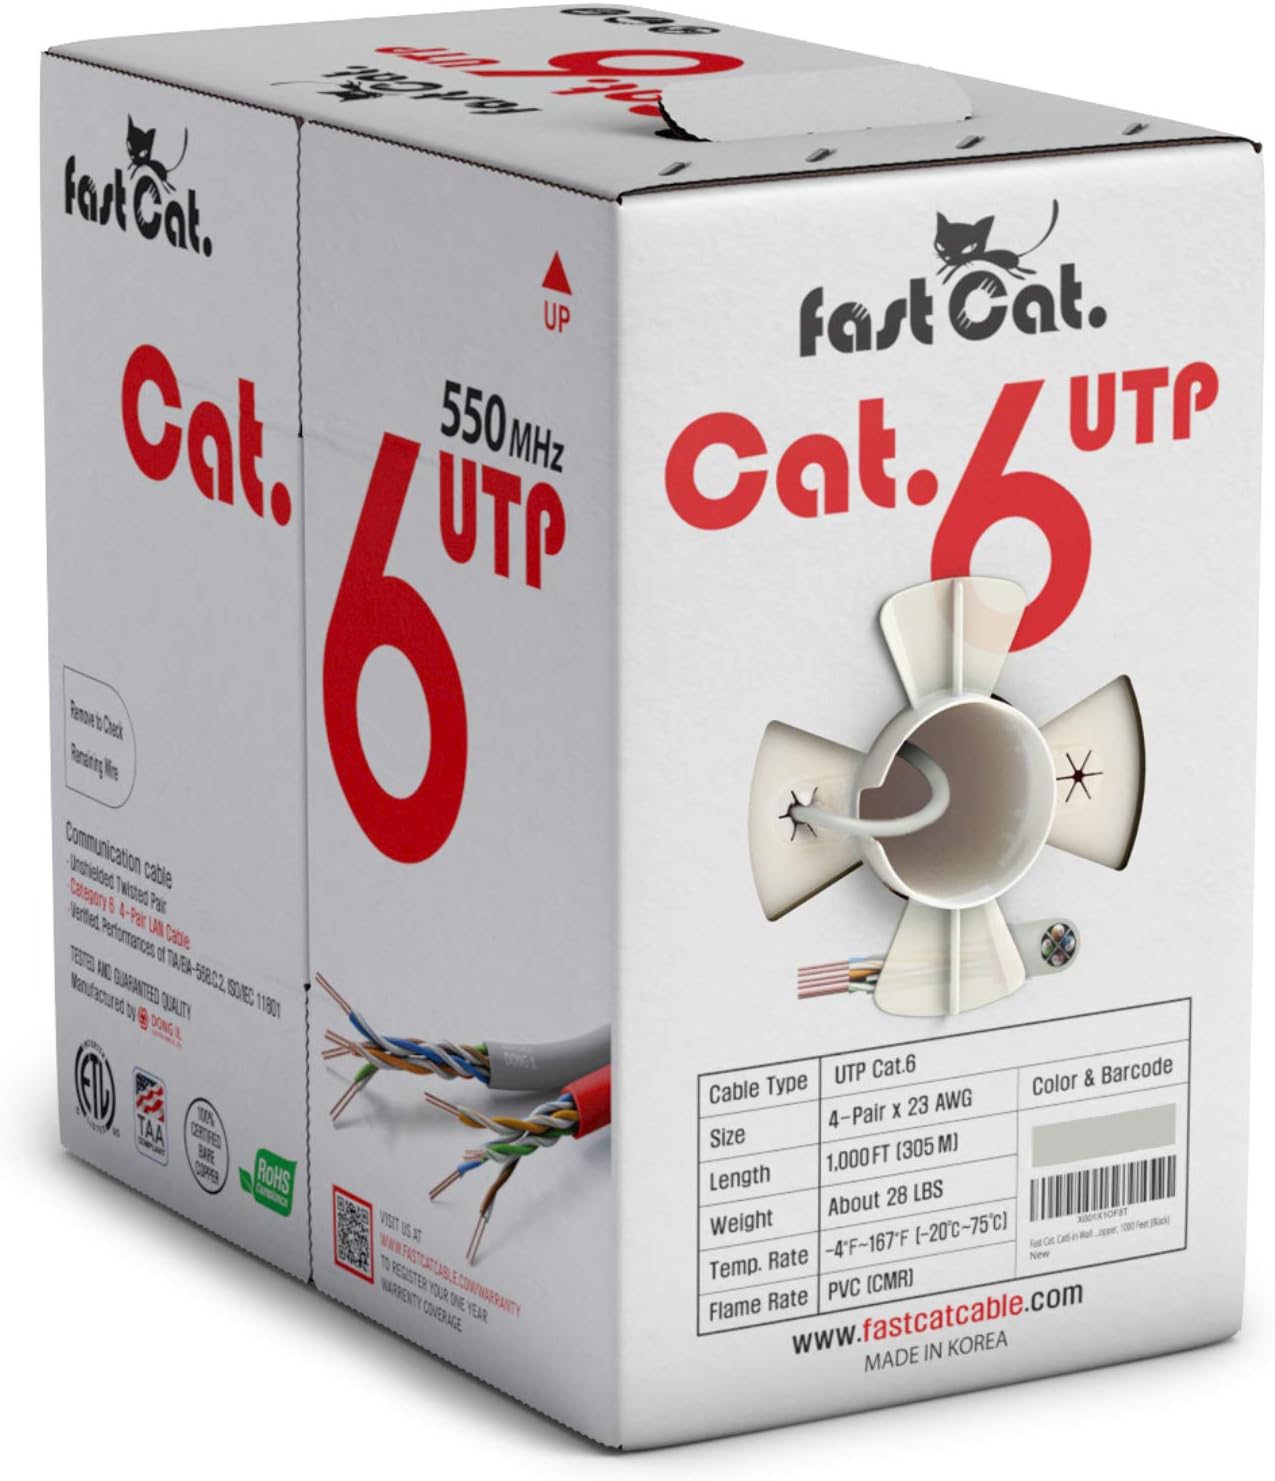 fast Cat. Cat6 Ethernet Cable 1000ft - 23 AWG, CMR, [...]